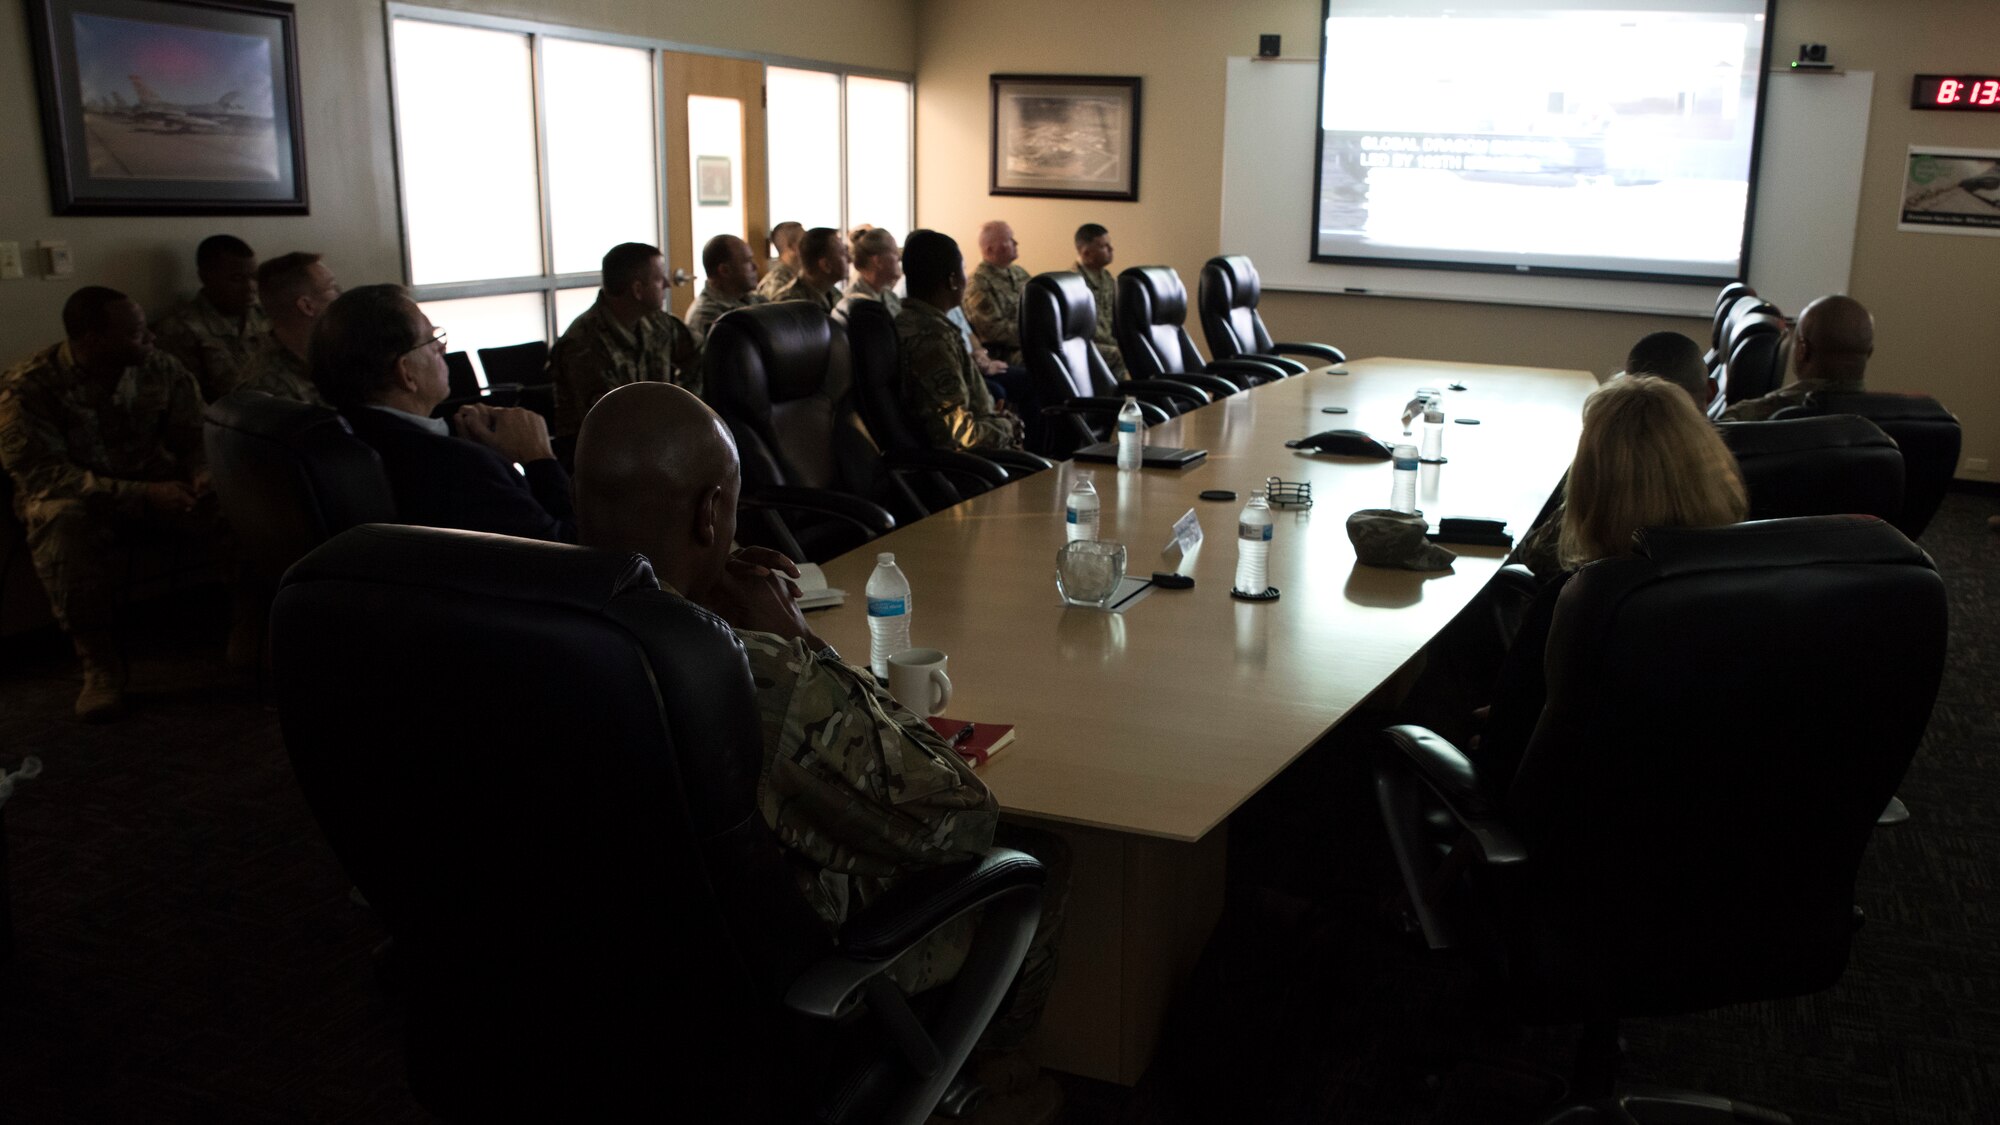 Chief Master Sergeant of the Air Force Kaleth O. Wright meets with the Chiefs of the 188th Wing at Fort Smith, Ark., Oct. 5, 2019. During the briefing each chief discussed their organization's capabilities and highlighted their Airmen's accomplishments. (U.S. Air National Guard photo by Tech. Sgt. Daniel J. Condit)